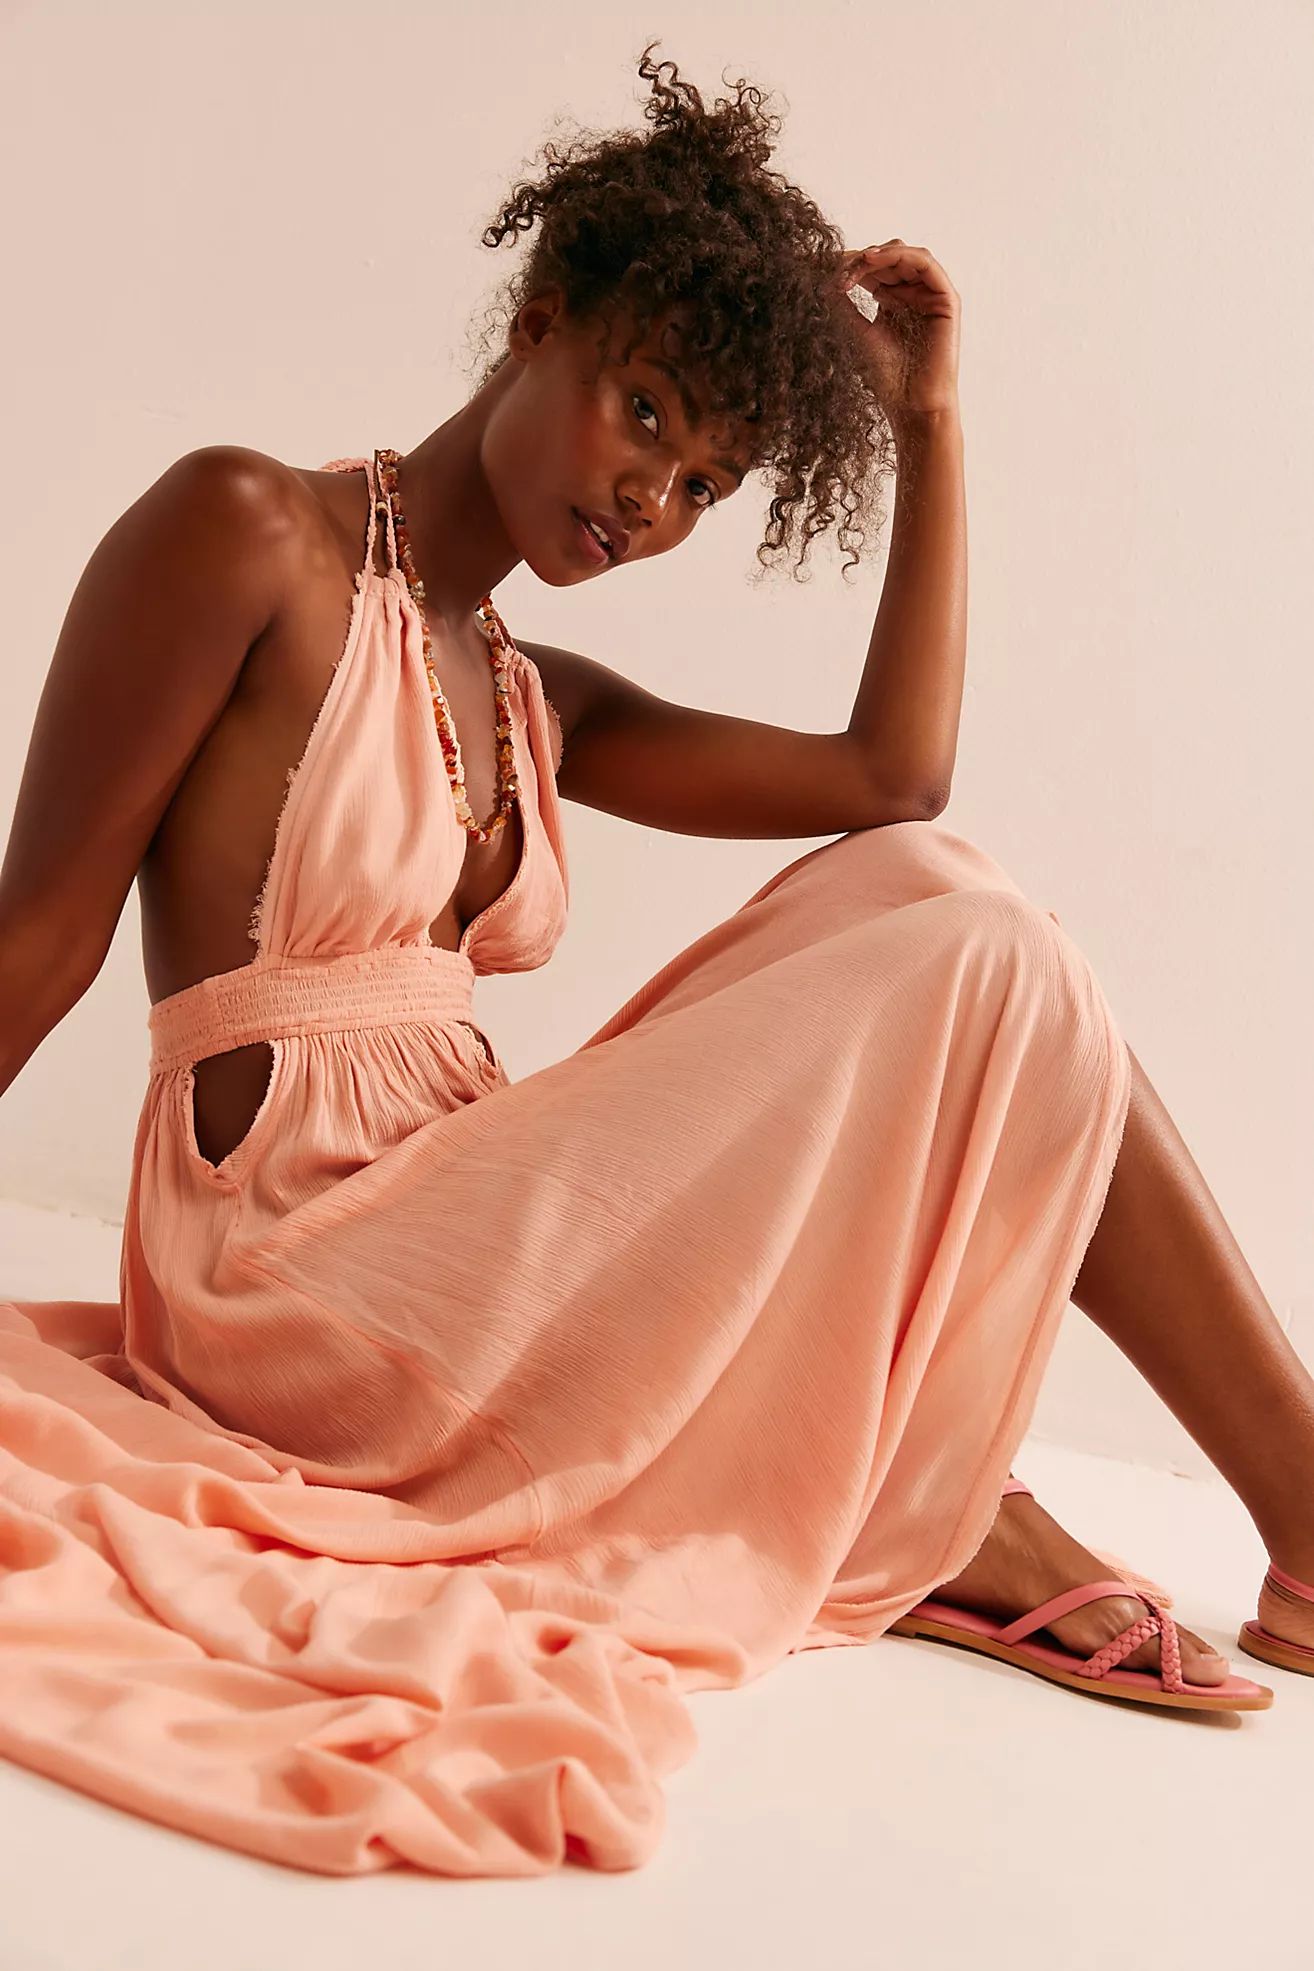 Look Into the Sun Maxi Dress | Free People (Global - UK&FR Excluded)